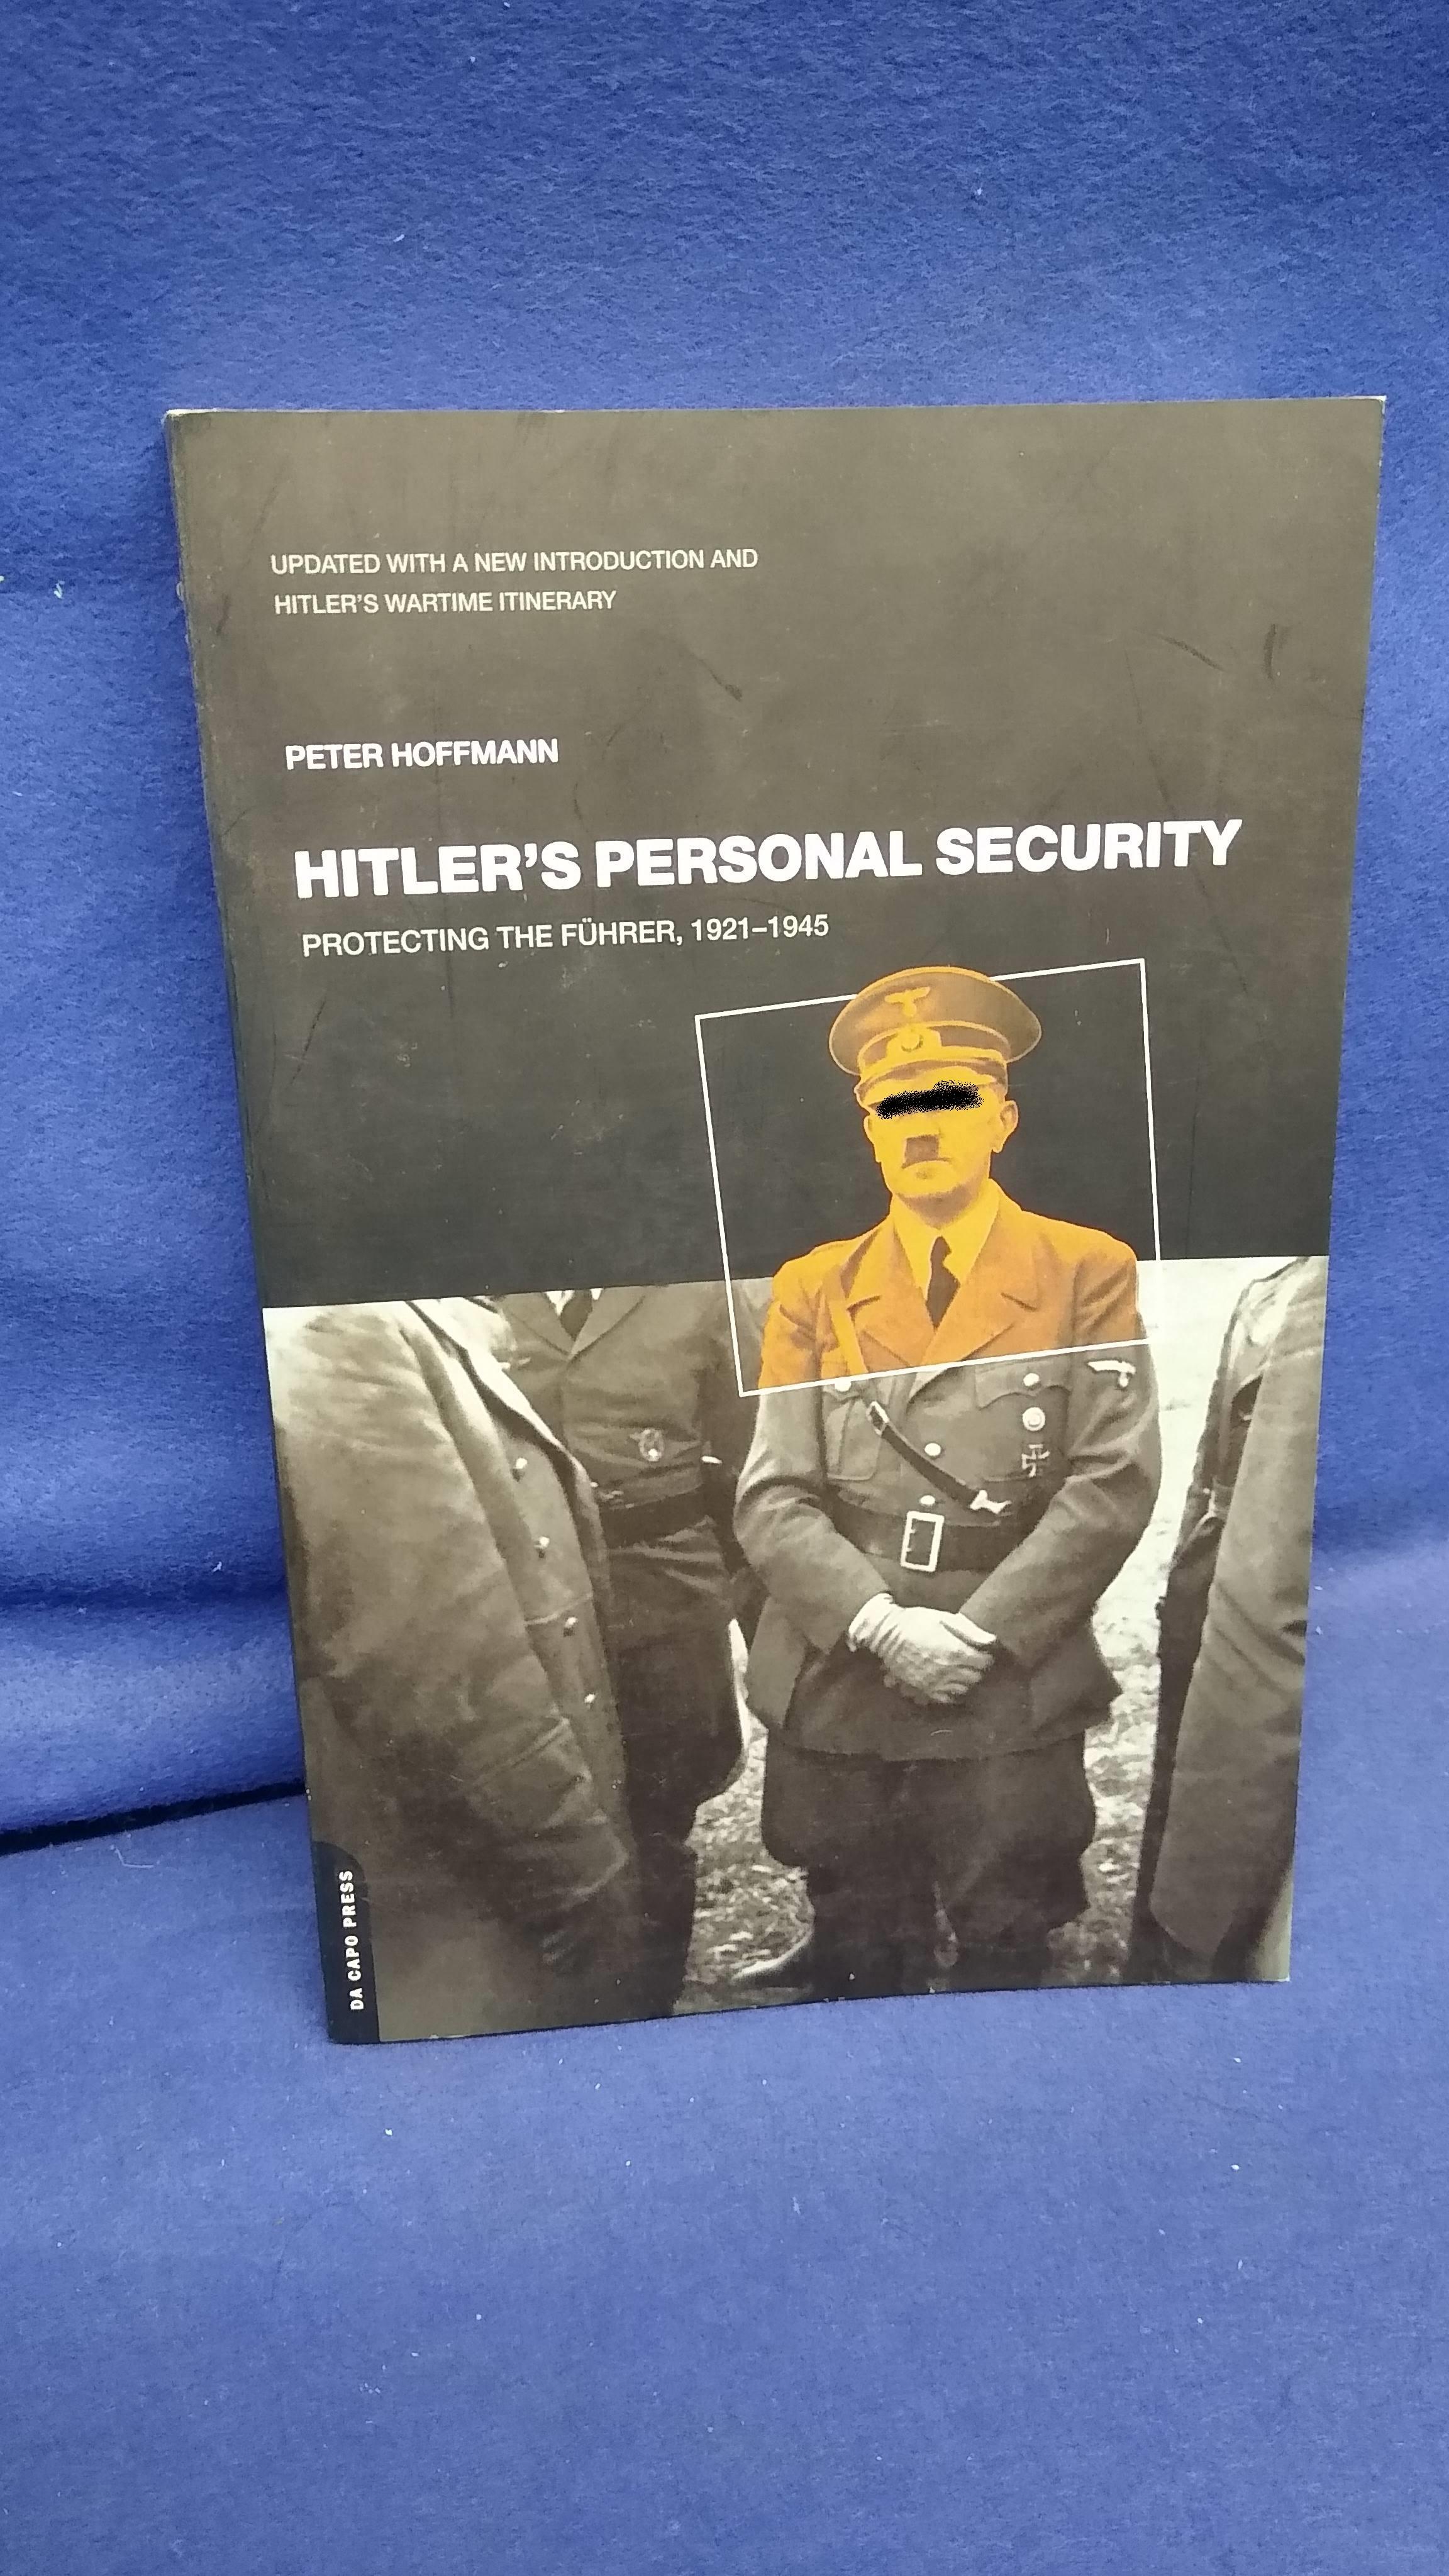 Hitler's personal security. Protecing the Führer, 1921-45.